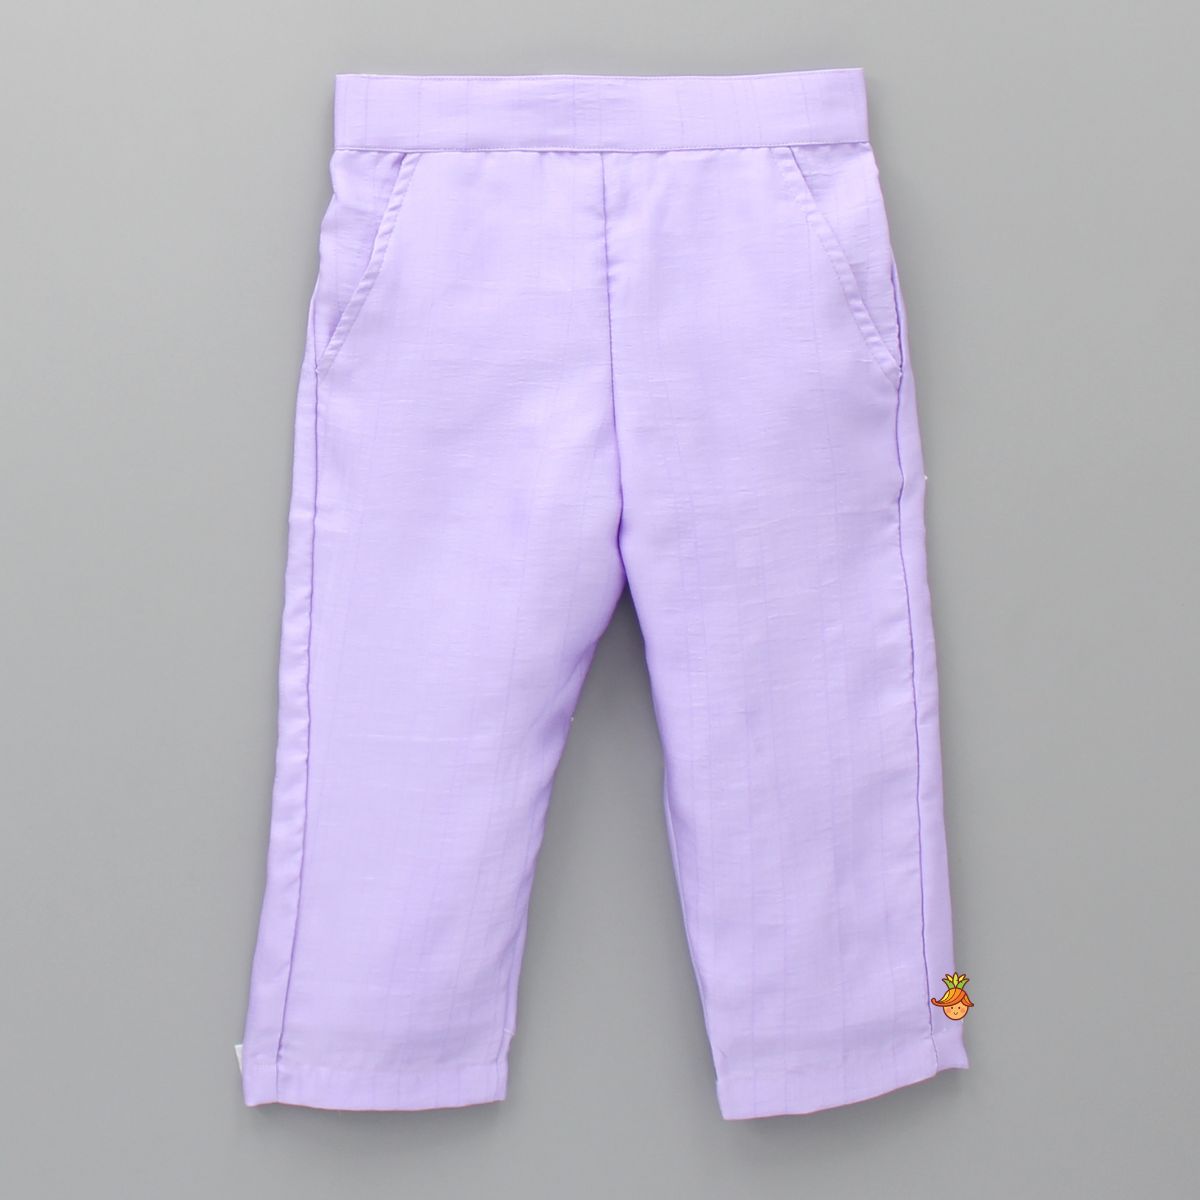 Contrasting Patch Pocket Detail Lavender Top And Pant